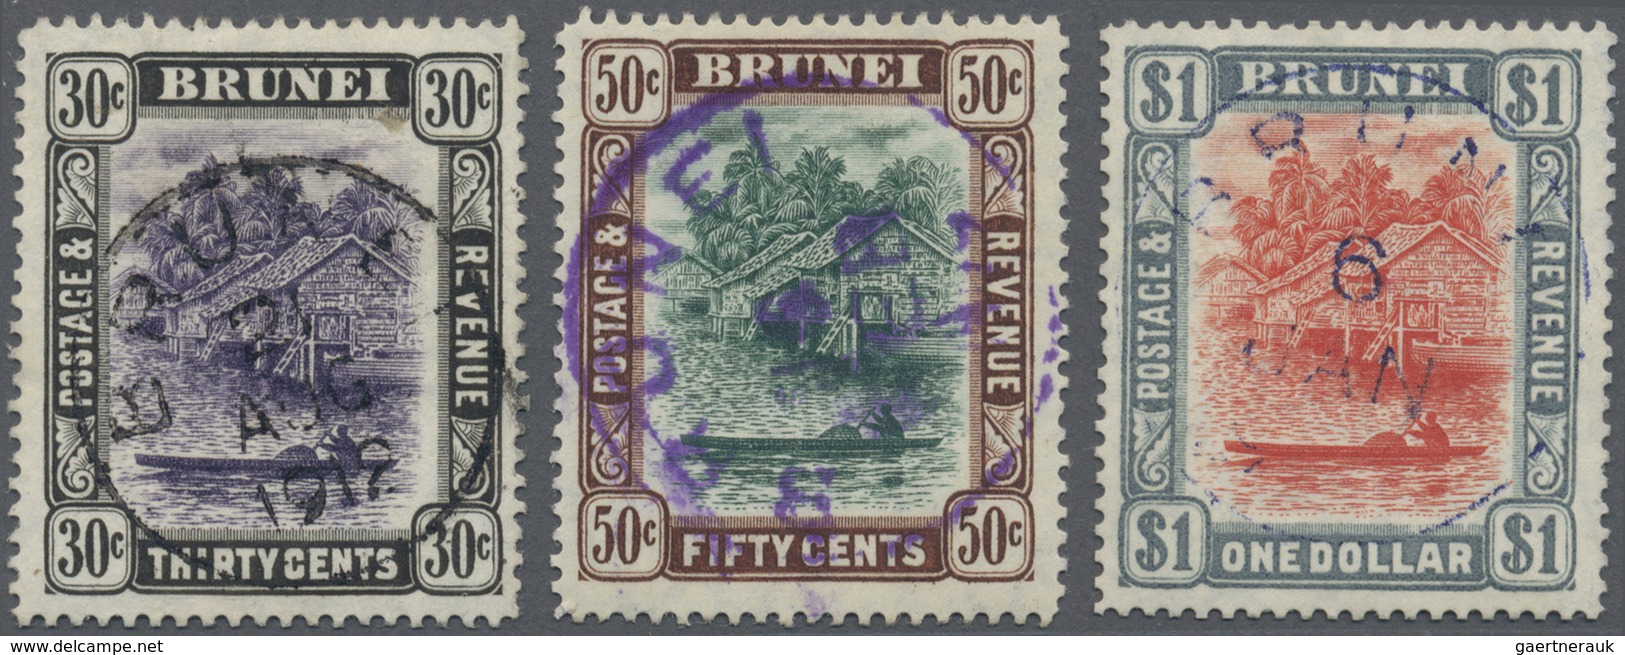 O Brunei: 1907, 'Huts And Canoe' Complete Set Of 11 Fine Used (25c. Some Tonespots), Attractive And Sc - Brunei (1984-...)